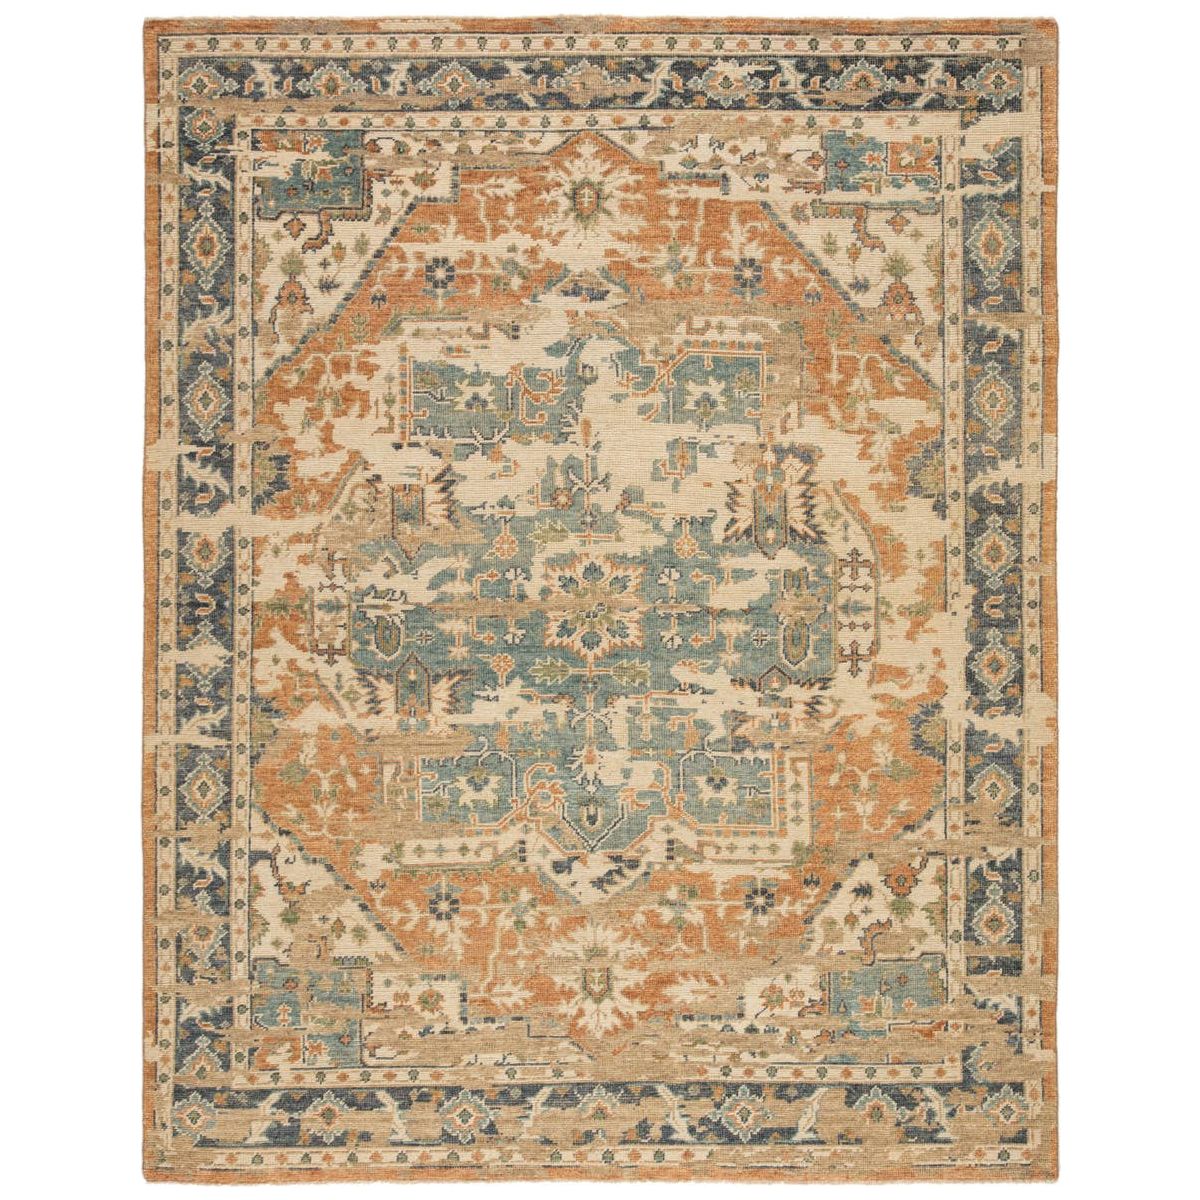 The Rhapsody Cadenza Honey Ginger Rug by Jaipur Living, or RHA02, showcases a distressed center medallion in in orange, blue, and light green on a neutral beige ground. This durable wool hand knotted rug is perfect for the living room, entry way, or other high traffic areas. 